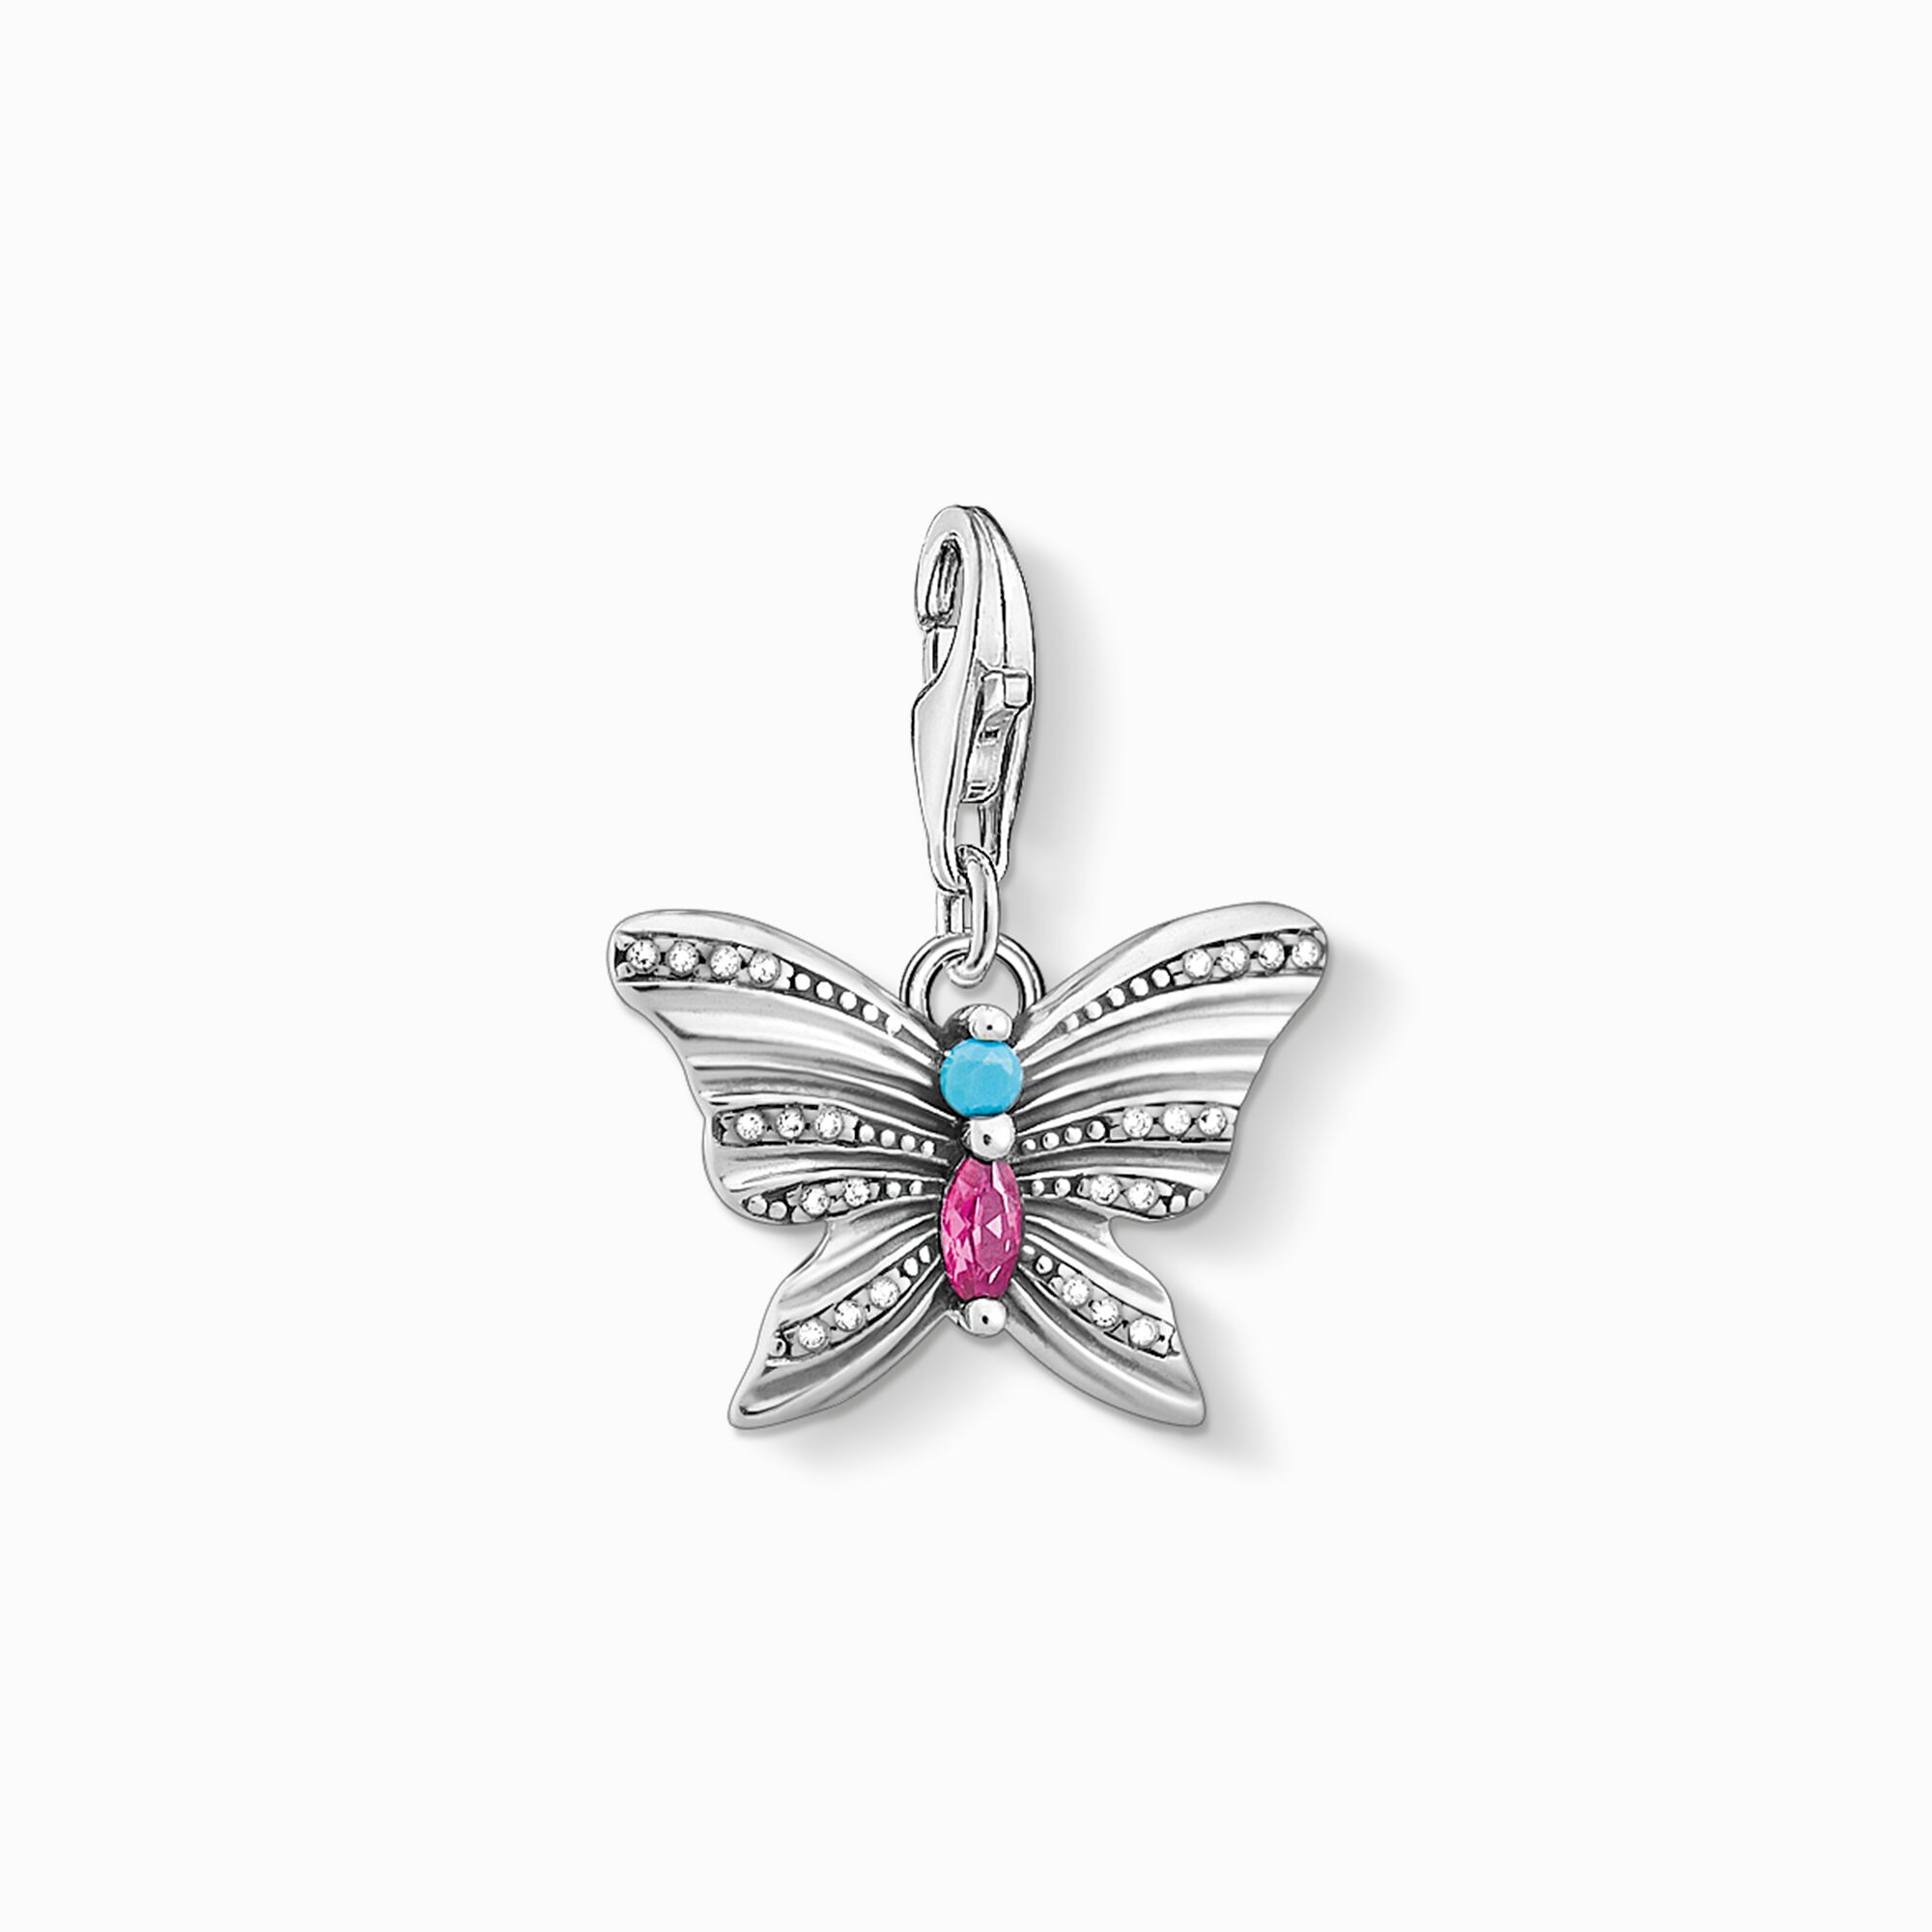 charm pendant butterfly silver from the Charm Club collection in the THOMAS SABO online store